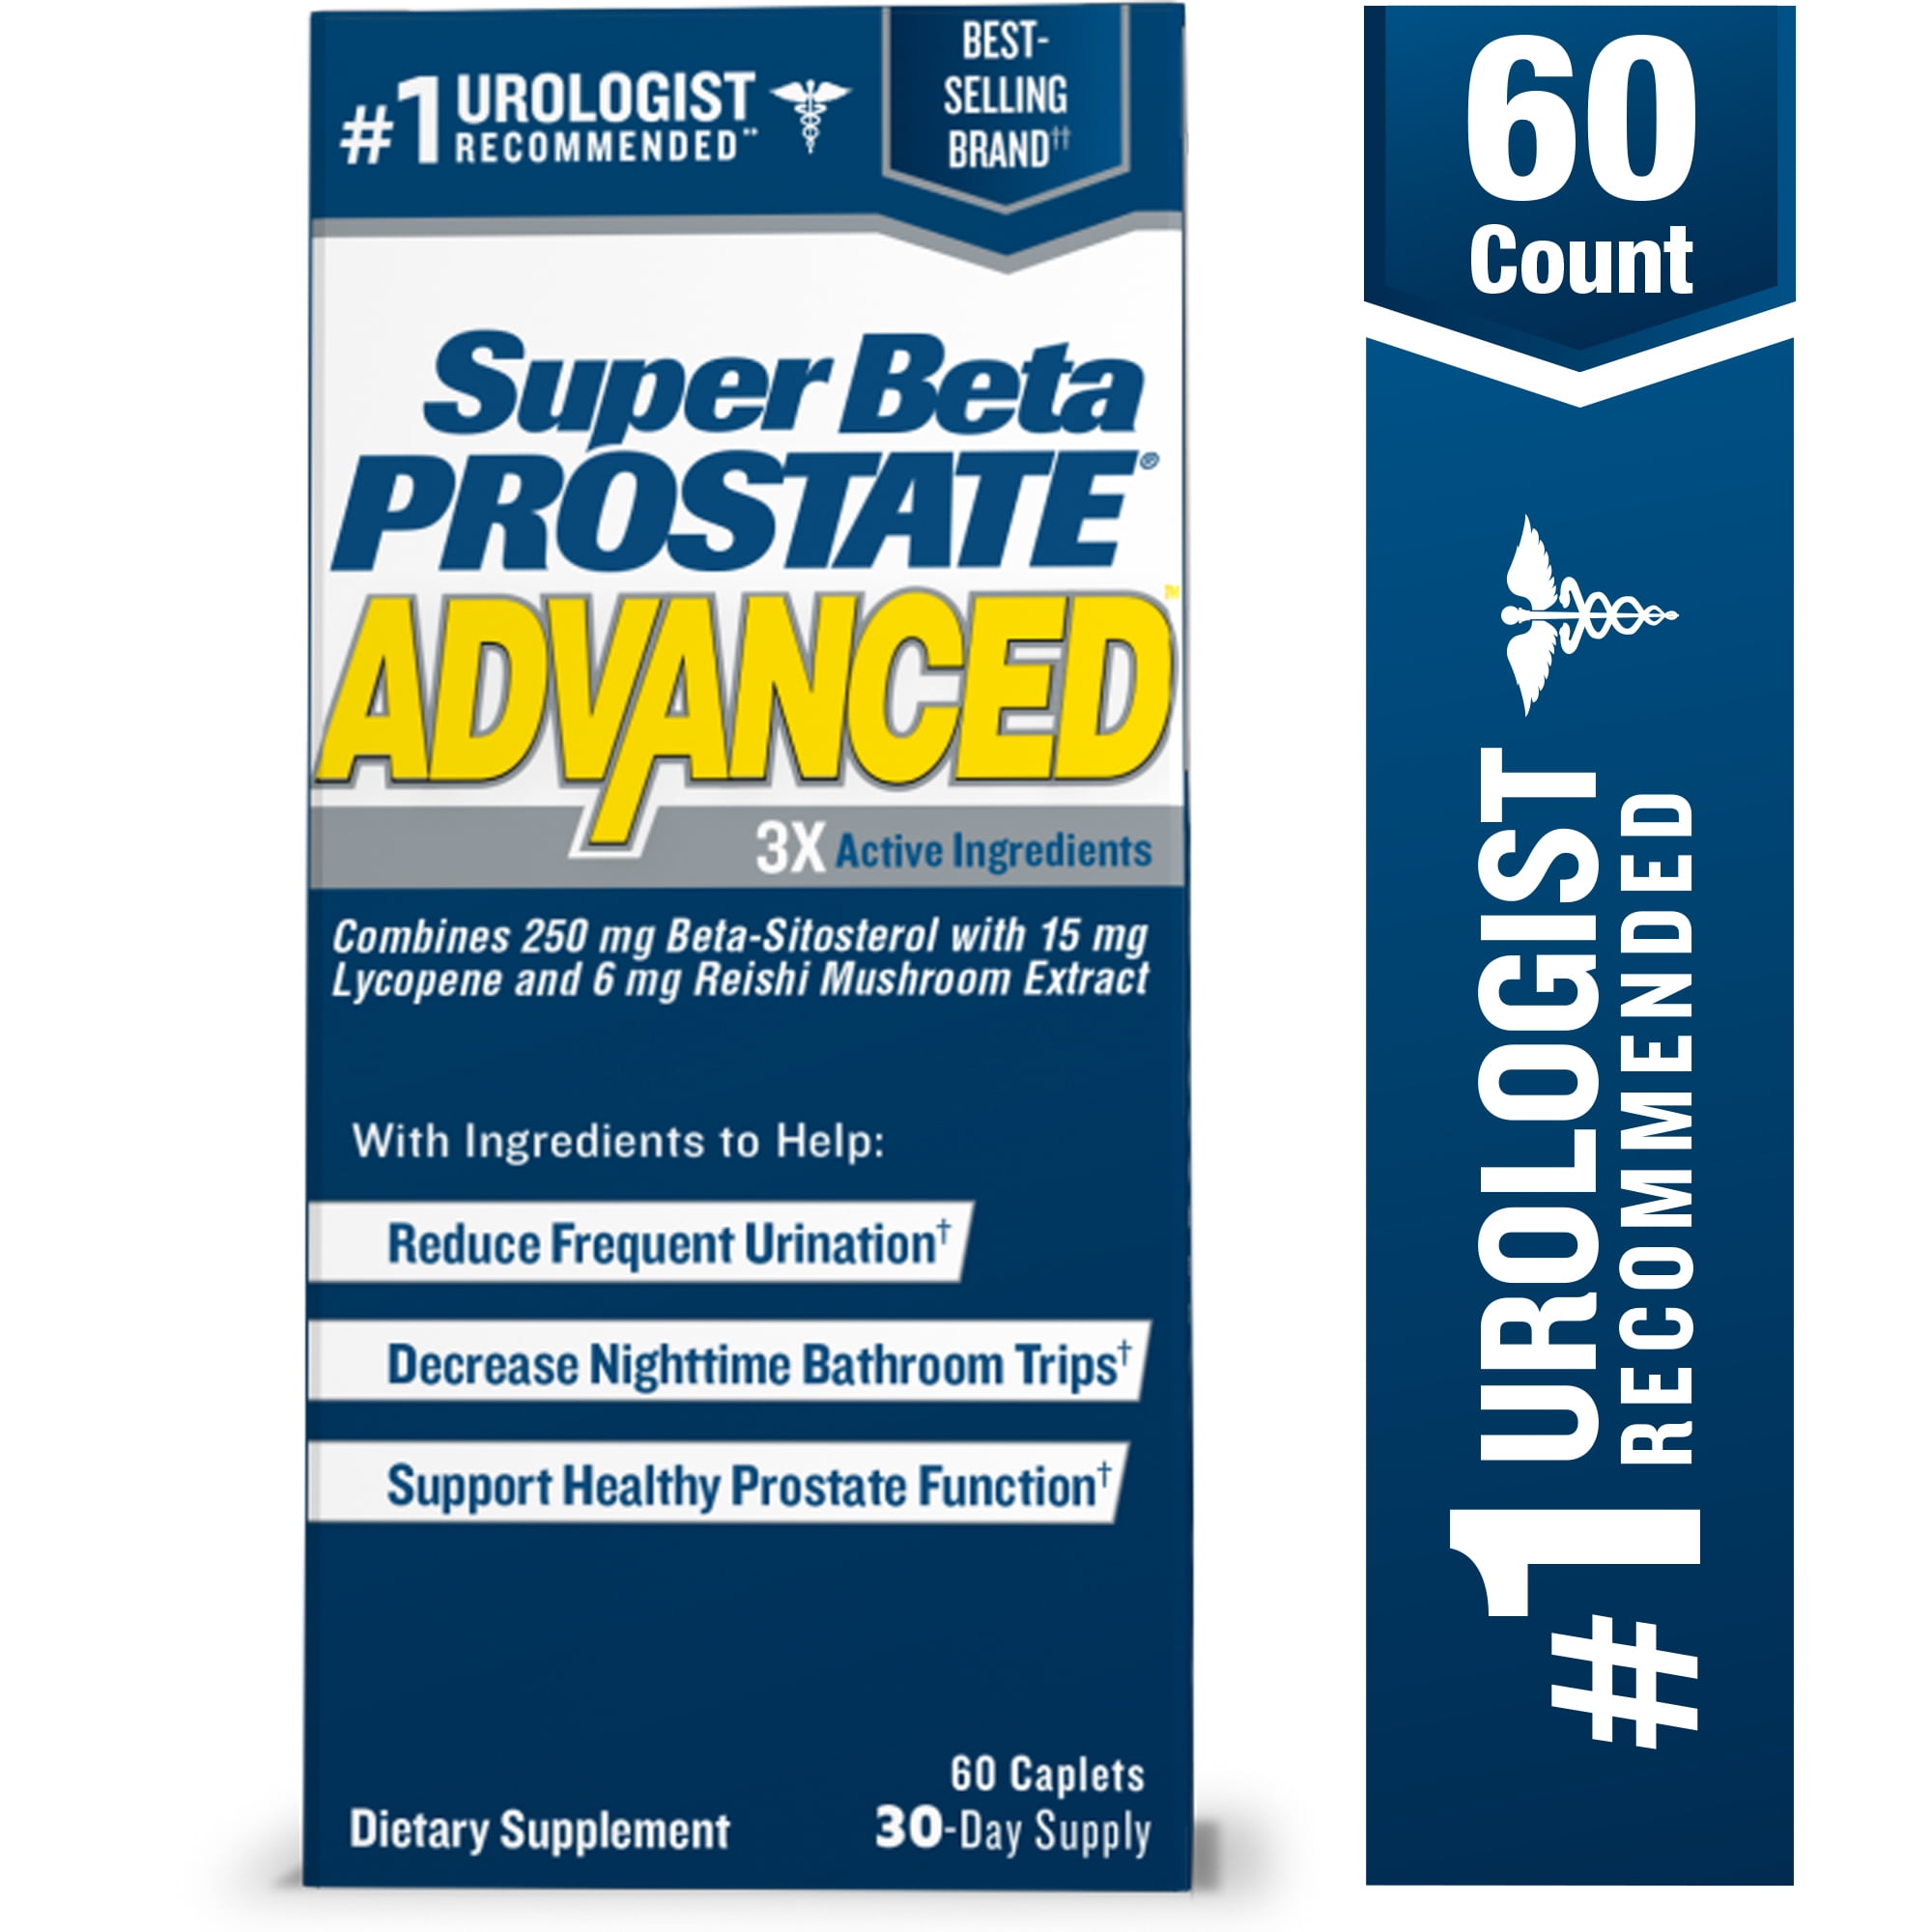 Super Beta Prostate Advanced Prostate Supplement for Men  Reduce Bathroom Trips, Promote Sleep, Support Urinary Health & Bladder Emptying. Beta Sitosterol not Saw Palmetto. (60 Caplets, 1-Bottl)